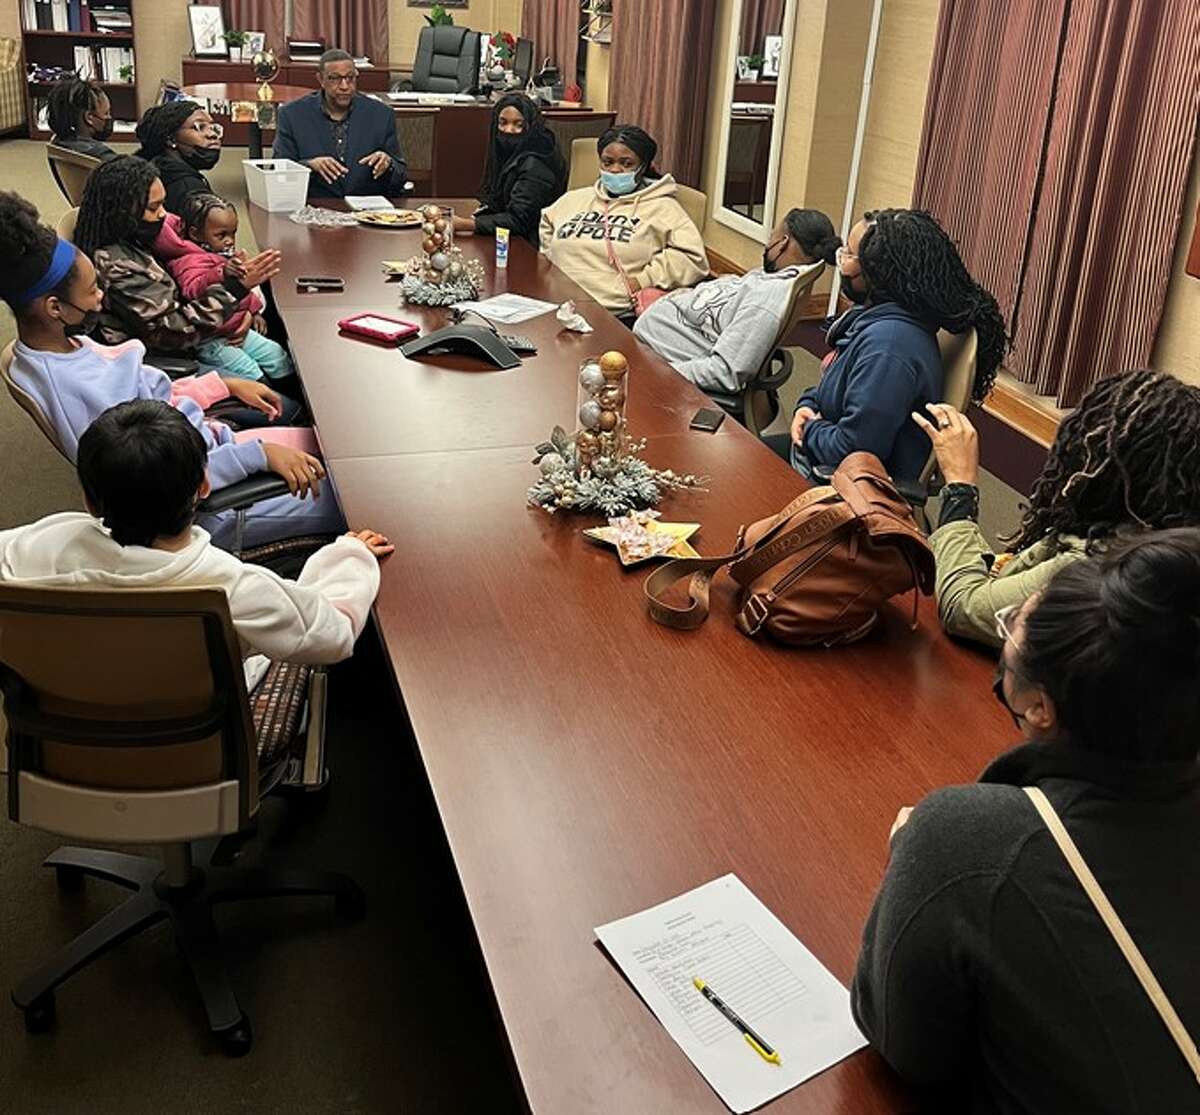 Be A Bridge nonprofit founder Marqueta Goins, and volunteer Amy Williams' girls group at Alton City Hall meeting with Alton Mayor David Goins, who's Marqueta Goins' father-in-law, to talk about adolescent youth needs in the community.